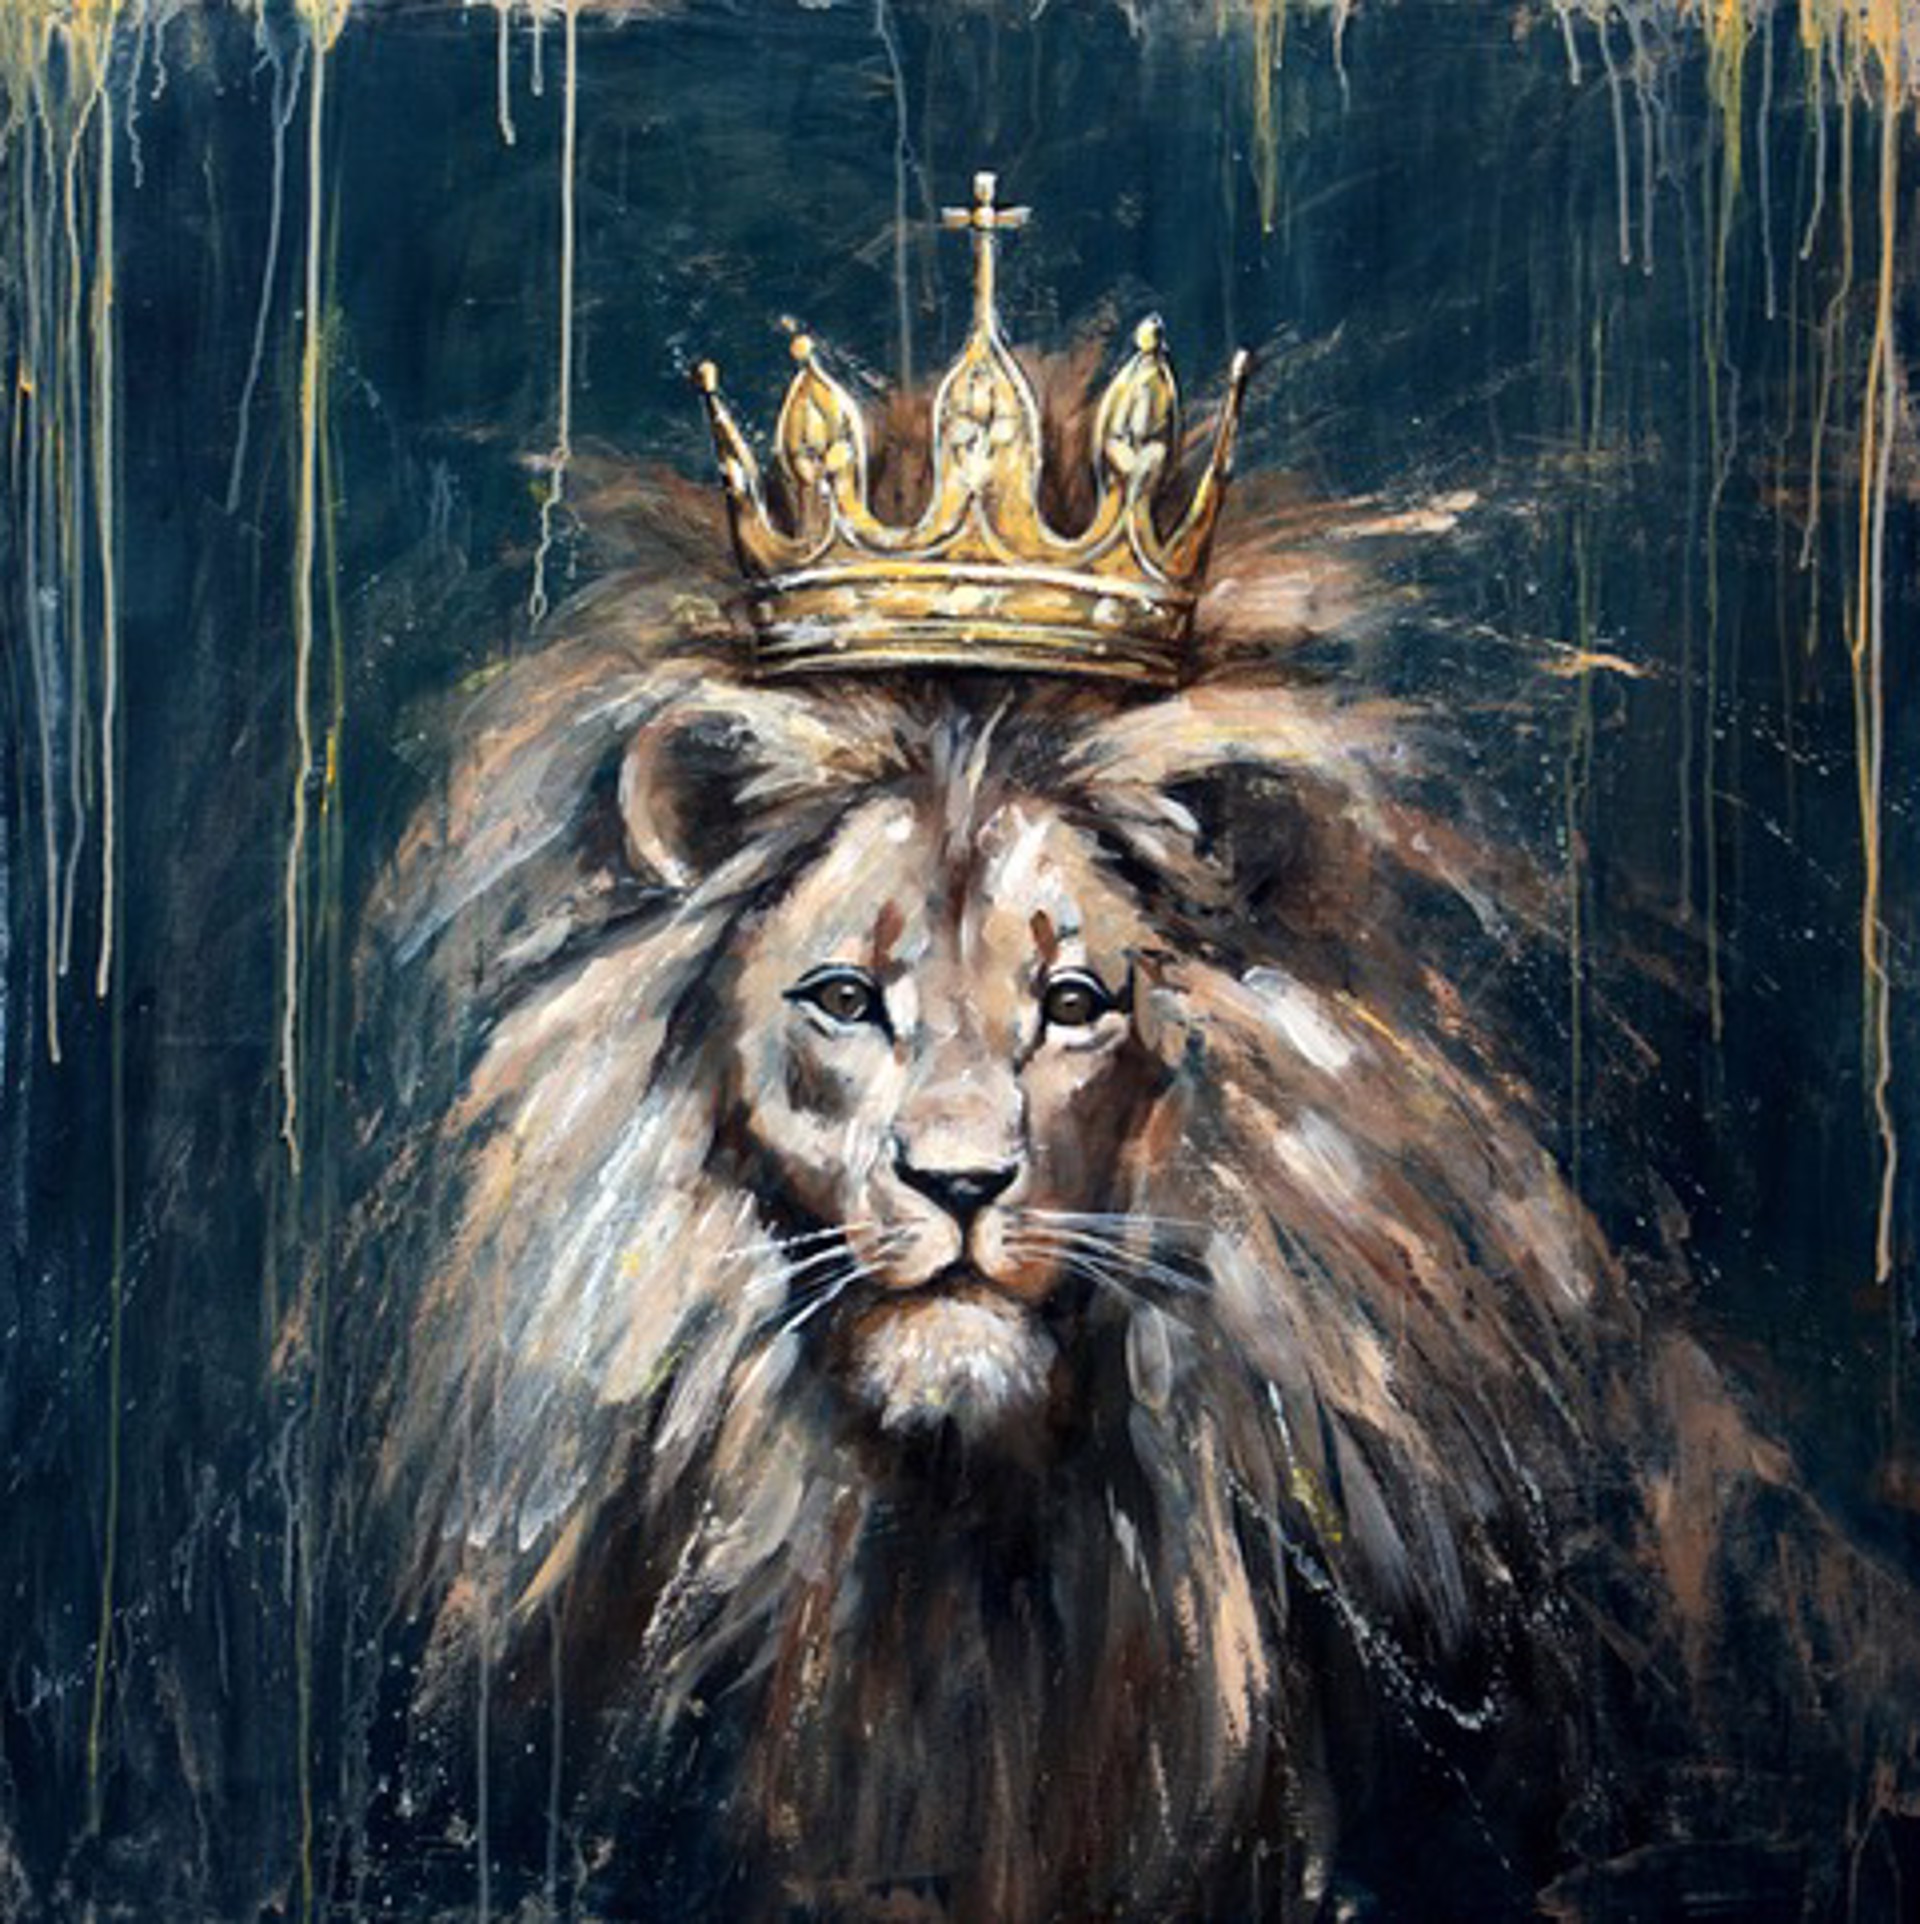 Crowned King by Laura Bowman